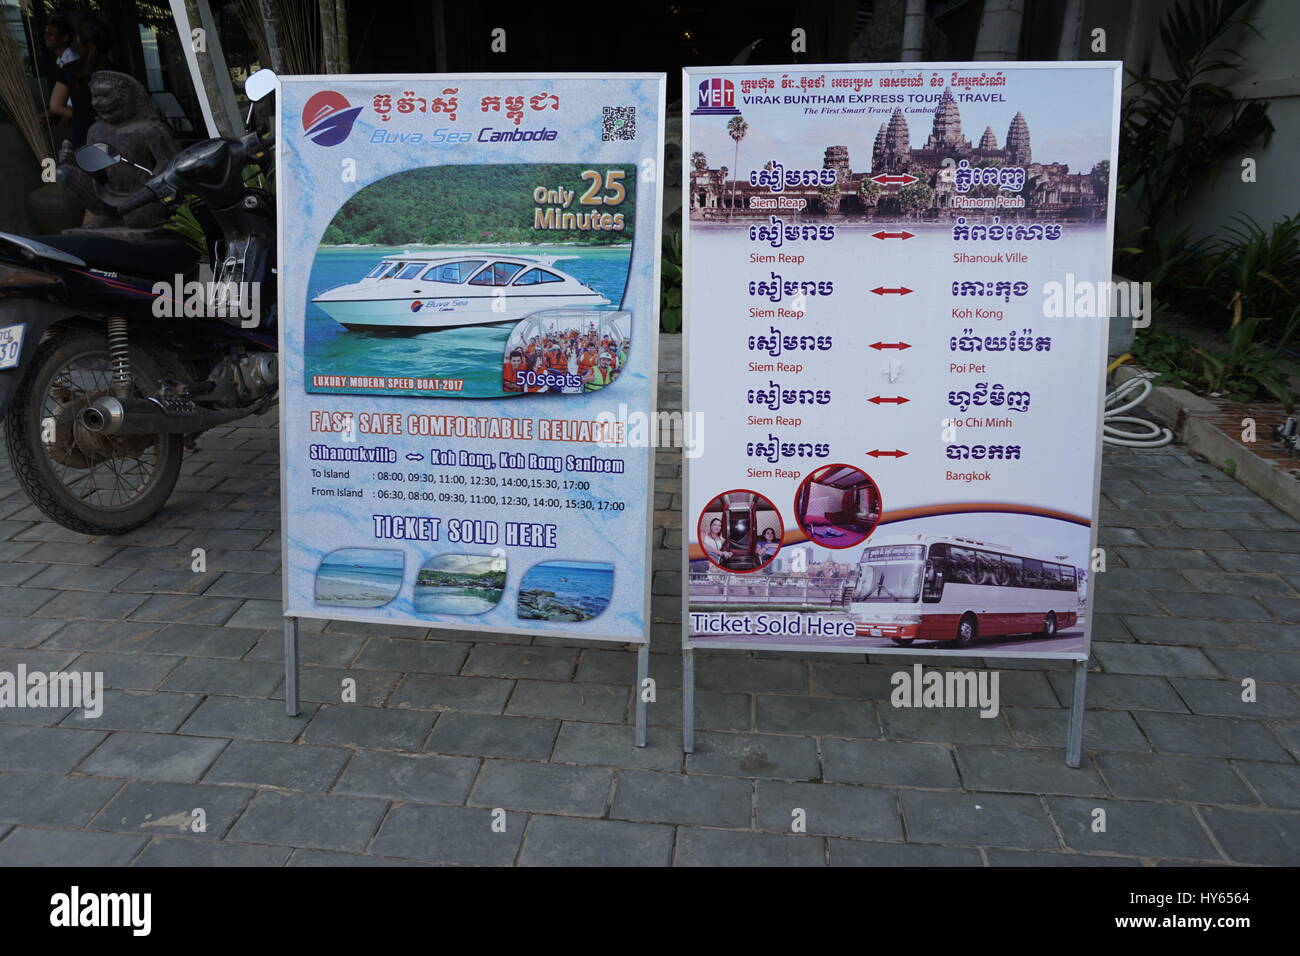 bus and boat ticket ads in Siam Reap Stock Photo